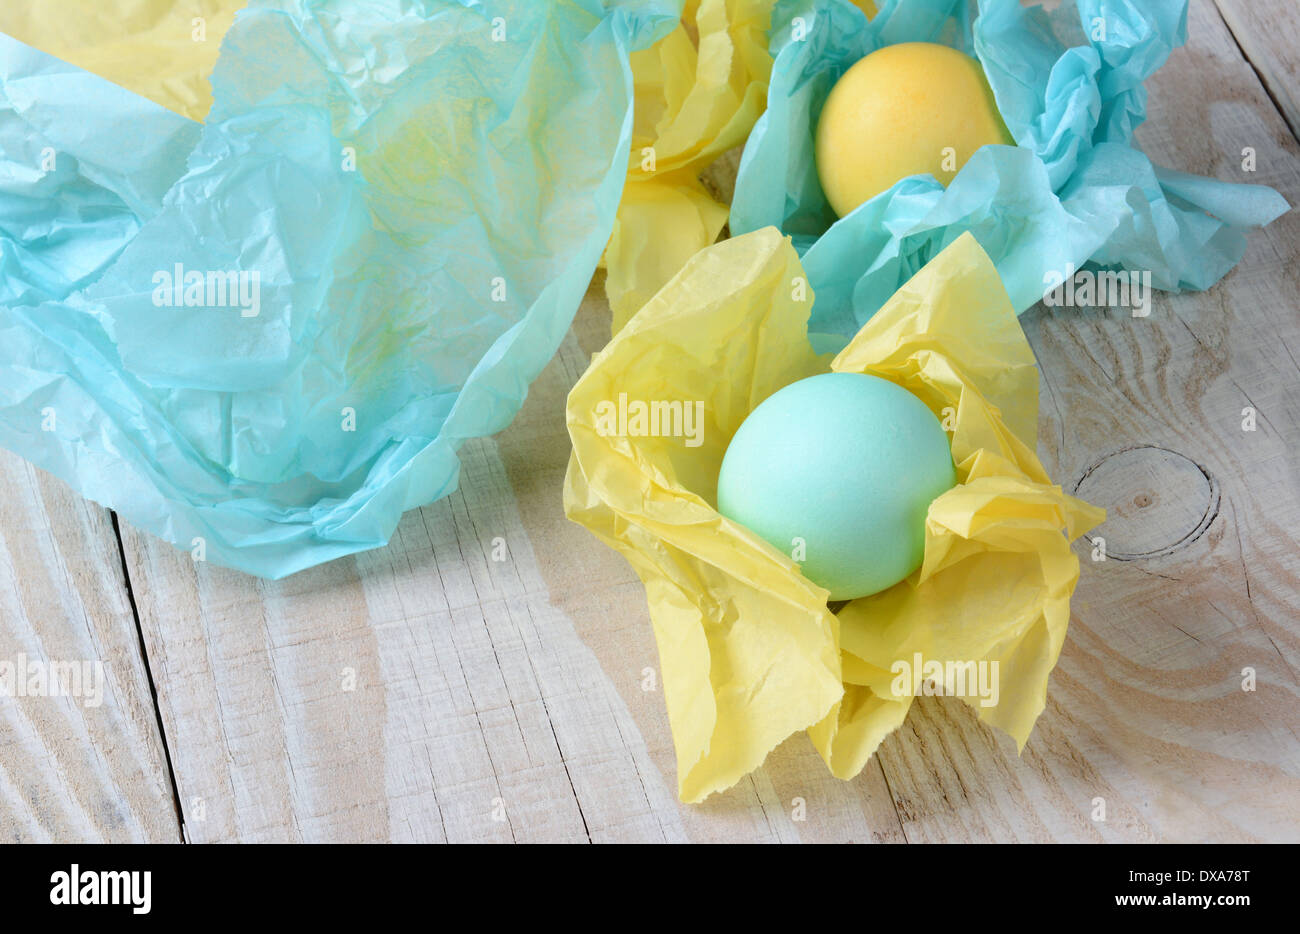 High angle view of pastel Easter eggs wrapped with tissue paper. Shallow depth of field with focus on the front egg. Stock Photo